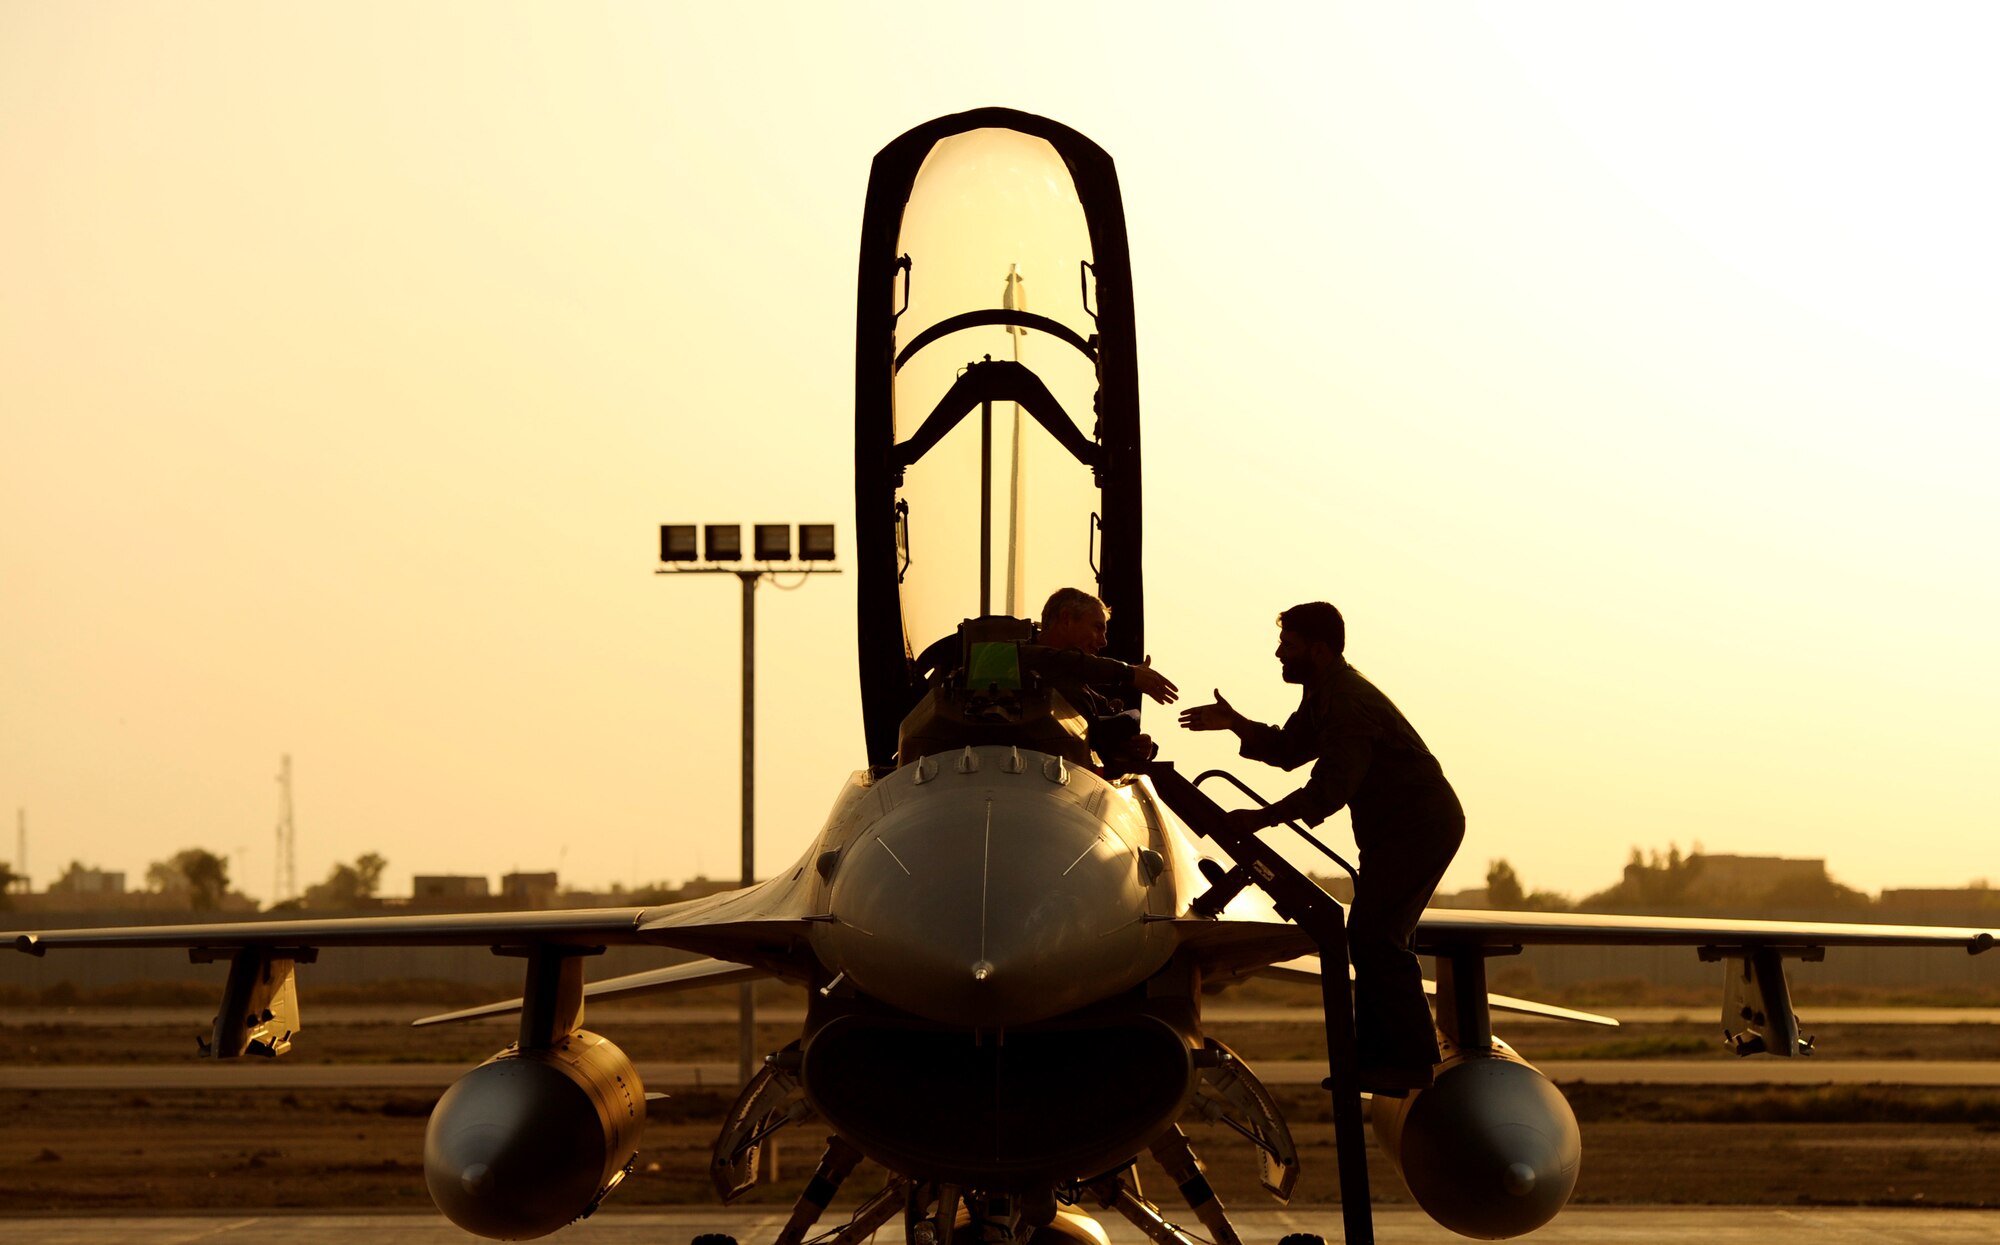 Lt. Col. Doug Read accepts a warm welcome at Shahbaz AB, Pakistan, after he and fellow 176th Fighter Squadron pilots Majors Bart Van Roo and Chris Hansen delivered three new F-16s to the Pakistani Air Force on October 30, 2010.